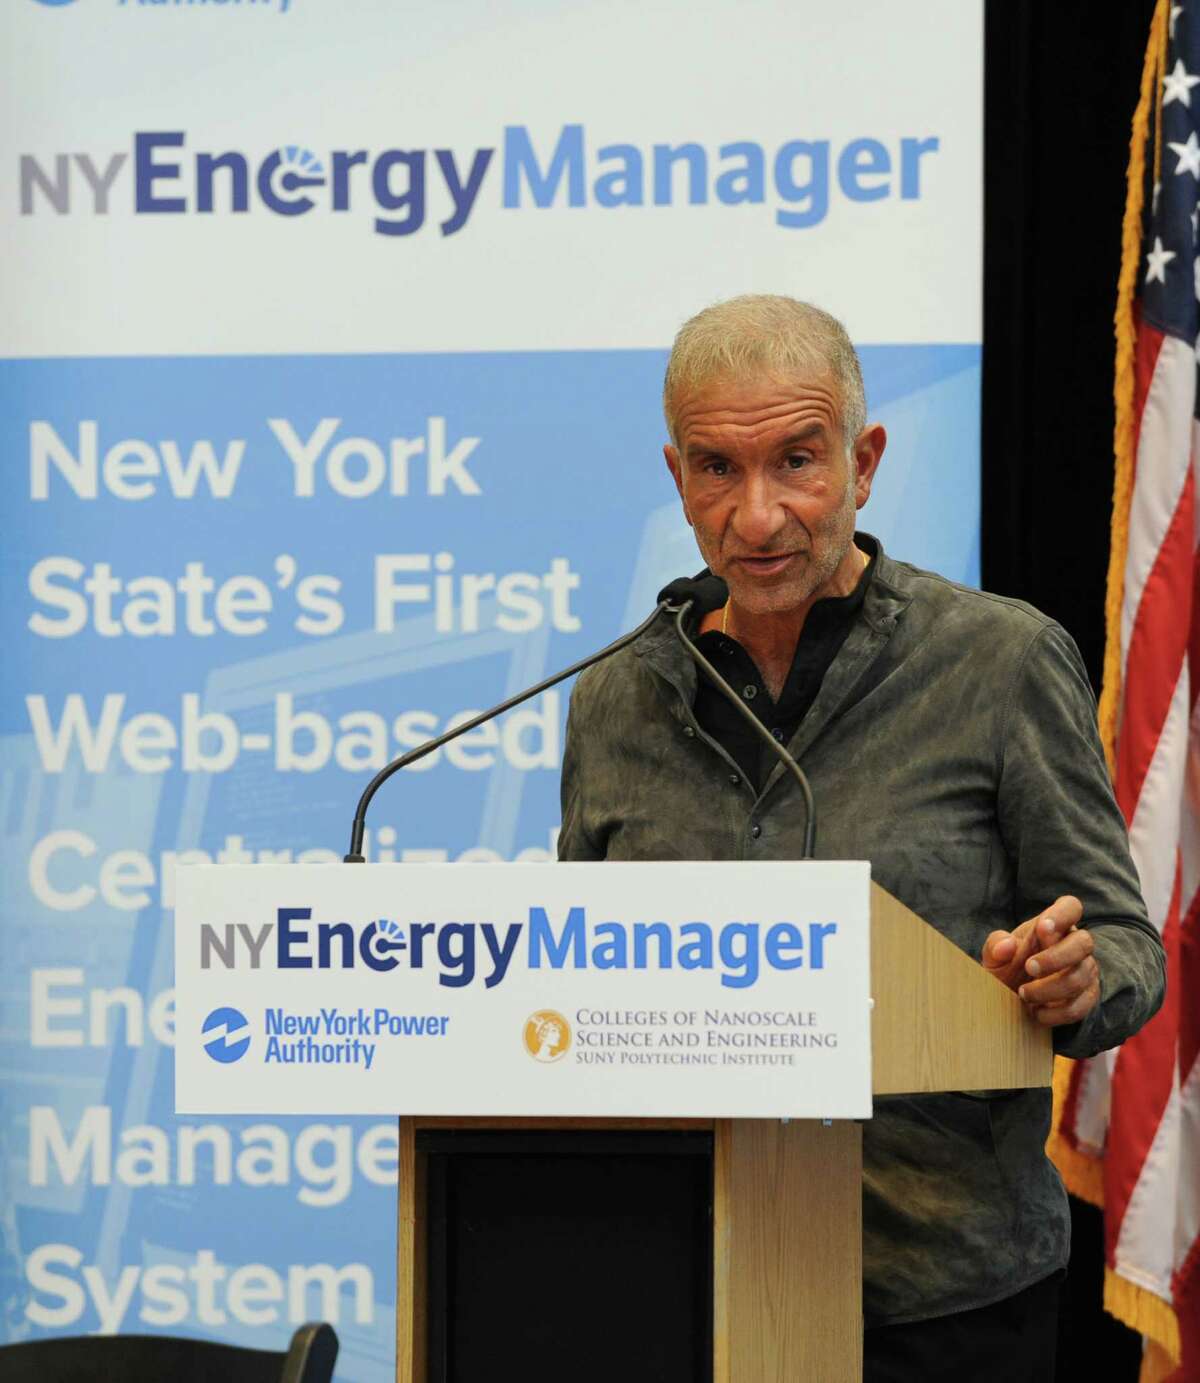 Senior Vice President and Chief Executive Officer, College of Nanoscale Science and Engineering (CNSE) Alain Kaloyeros speaks as New York Power Authority and CNSE at SUNY Polytechnic Institute hold a joint news conference to announce the launch of New York State's first energy management network operations center - the NY Energy Manager (NYEM) -located at CNSE Tuesday, Oct. 21, 2014 in Albany, N.Y.(Lori Van Buren / Times Union)